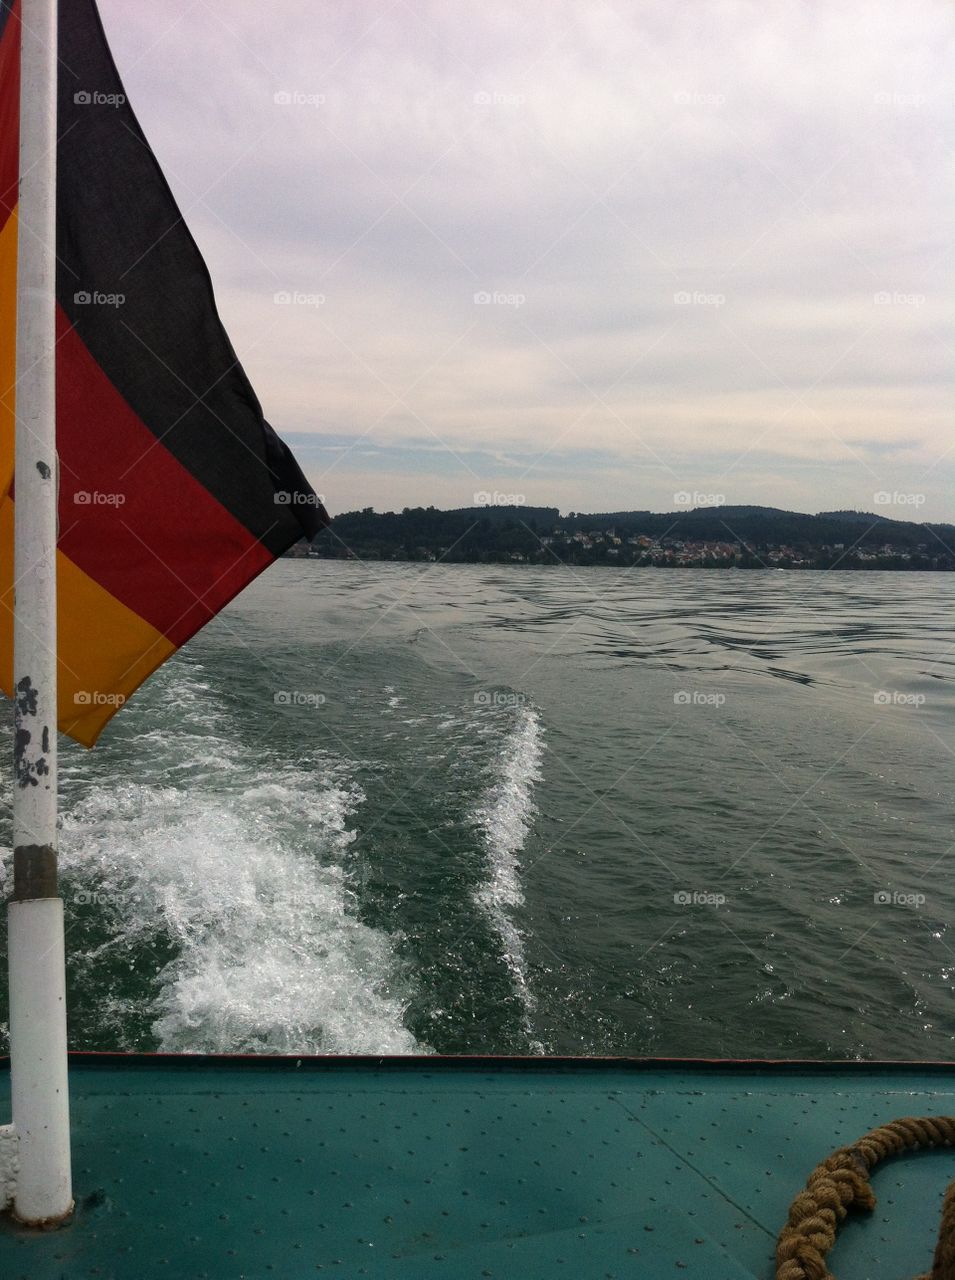 A German flag hanging off the back of a river boat. Cruising on the lake on a beautiful day